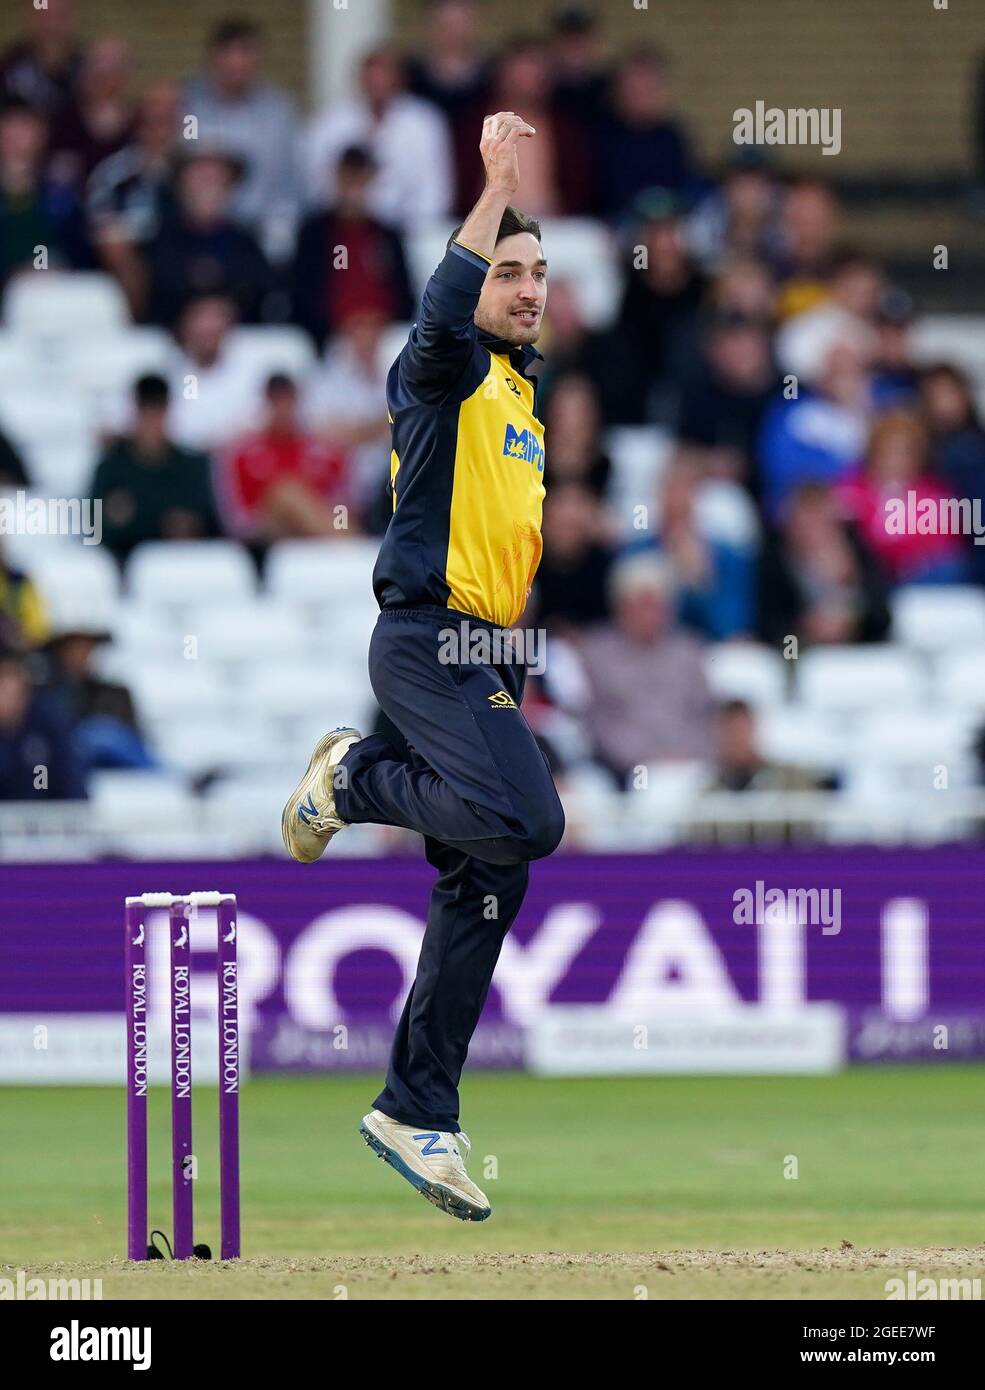 Glamorgan's Andrew Salter reacts during the Royal London One-Day Cup Final at Trent Bridge, Nottingham. Picture date: Thursday August 19, 2021. See PA story CRICKET Final. Photo credit should read: Zac Goodwin/PA Wire. RESTRICTIONS: No commercial use without prior written consent of the ECB. Still image use only. No moving images to emulate broadcast. Editorial use only. No removing or obscuring of sponsor logos. Stock Photo